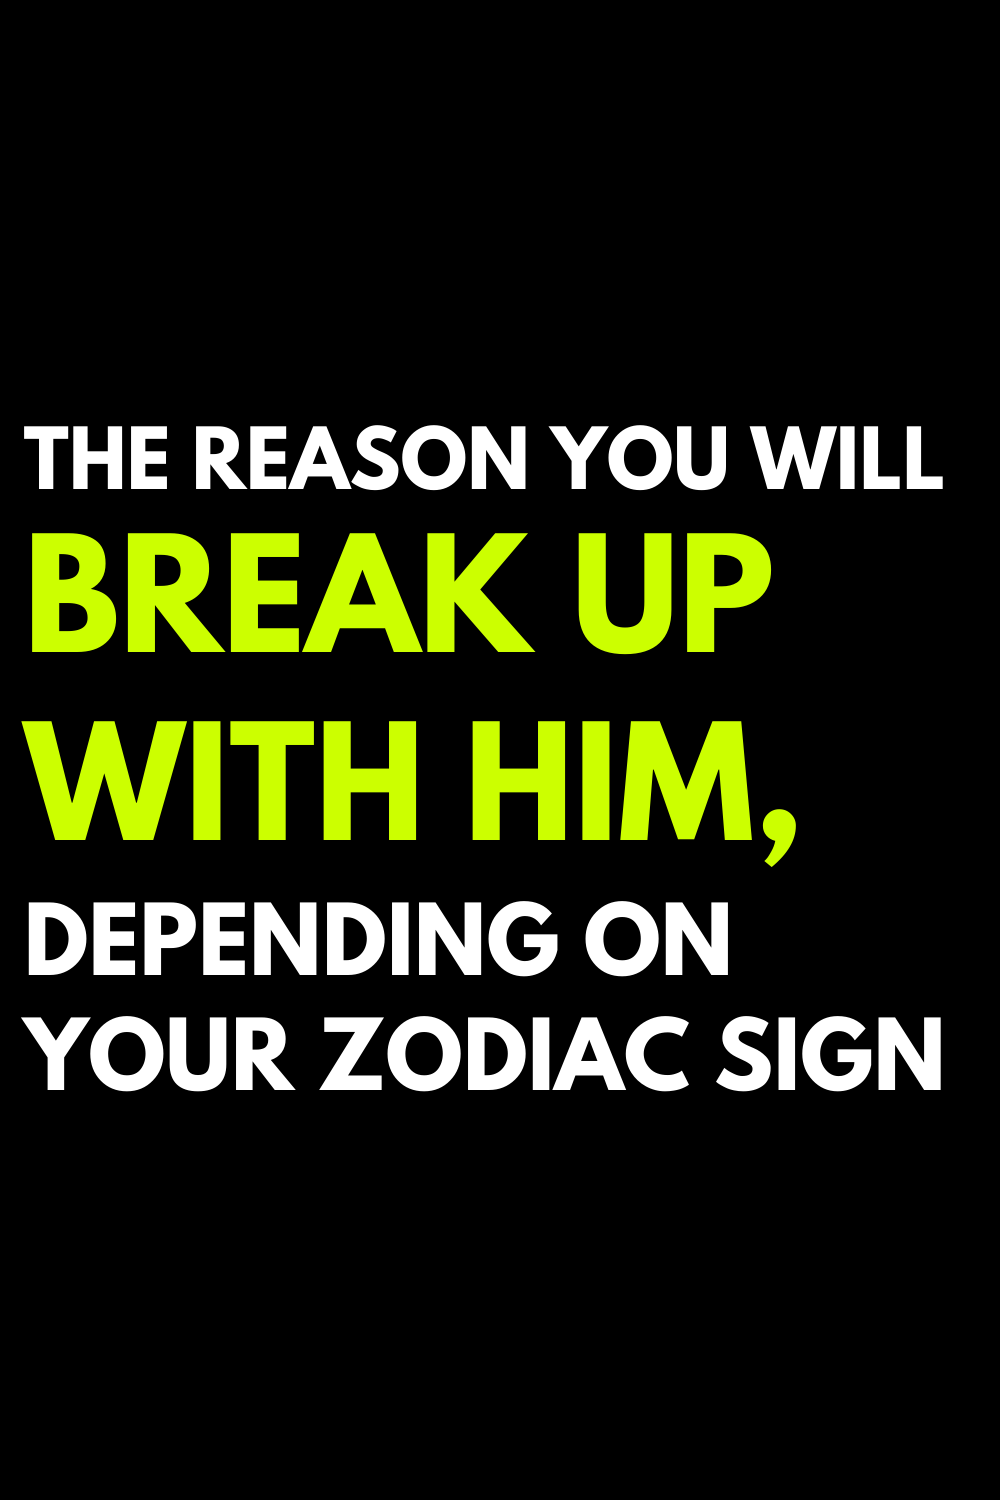 The reason you will break up with him, depending on your zodiac sign